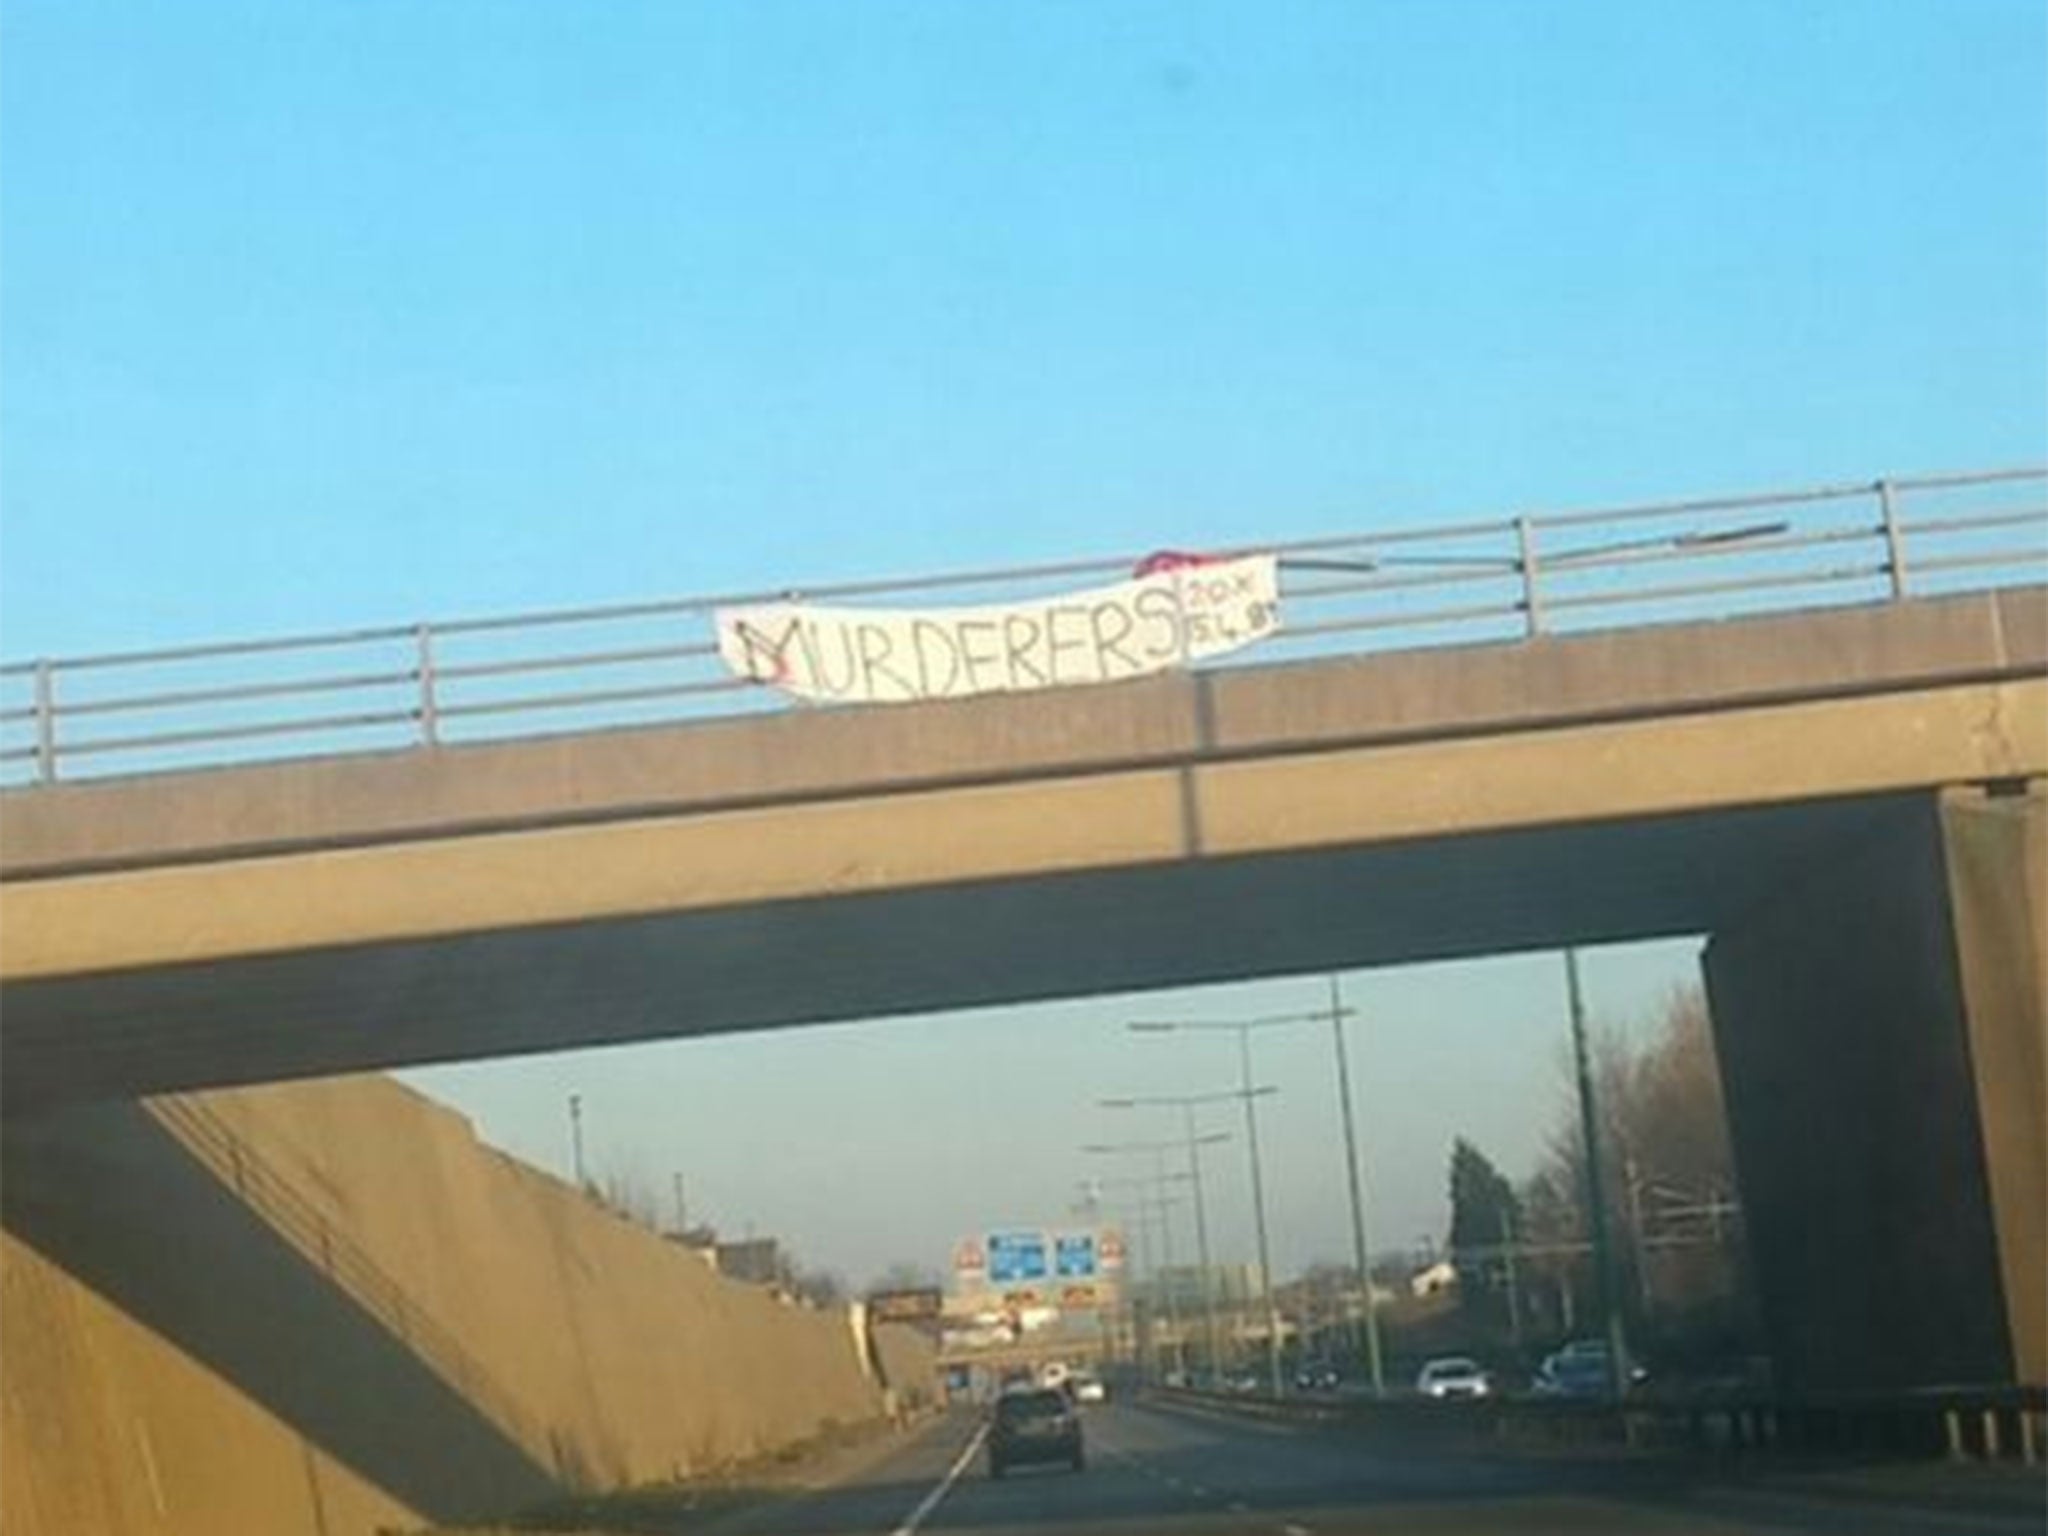 The 'MURDERERS' banner hung over the M602